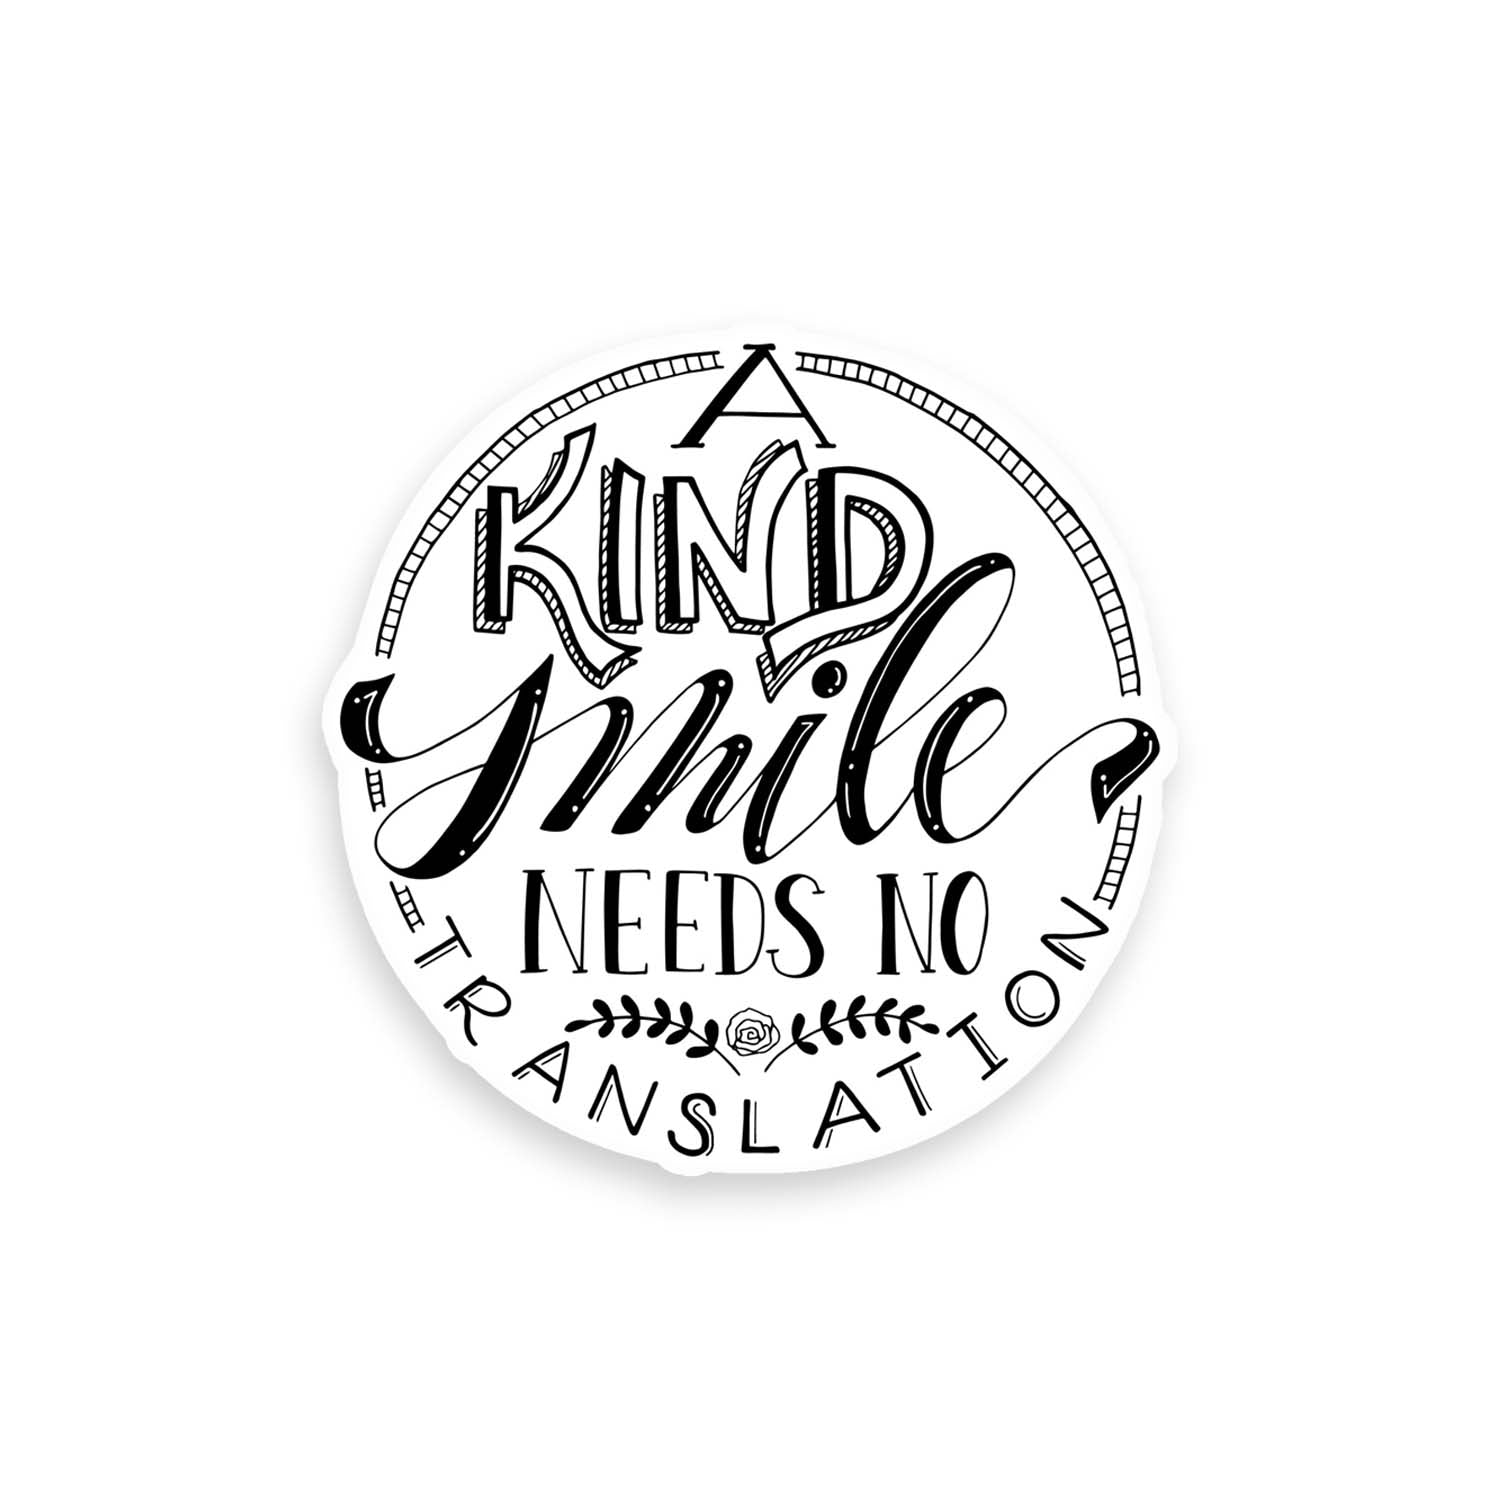 3" hand lettered illustrated vinyl sticker saying a kind smile needs no translation in black and white